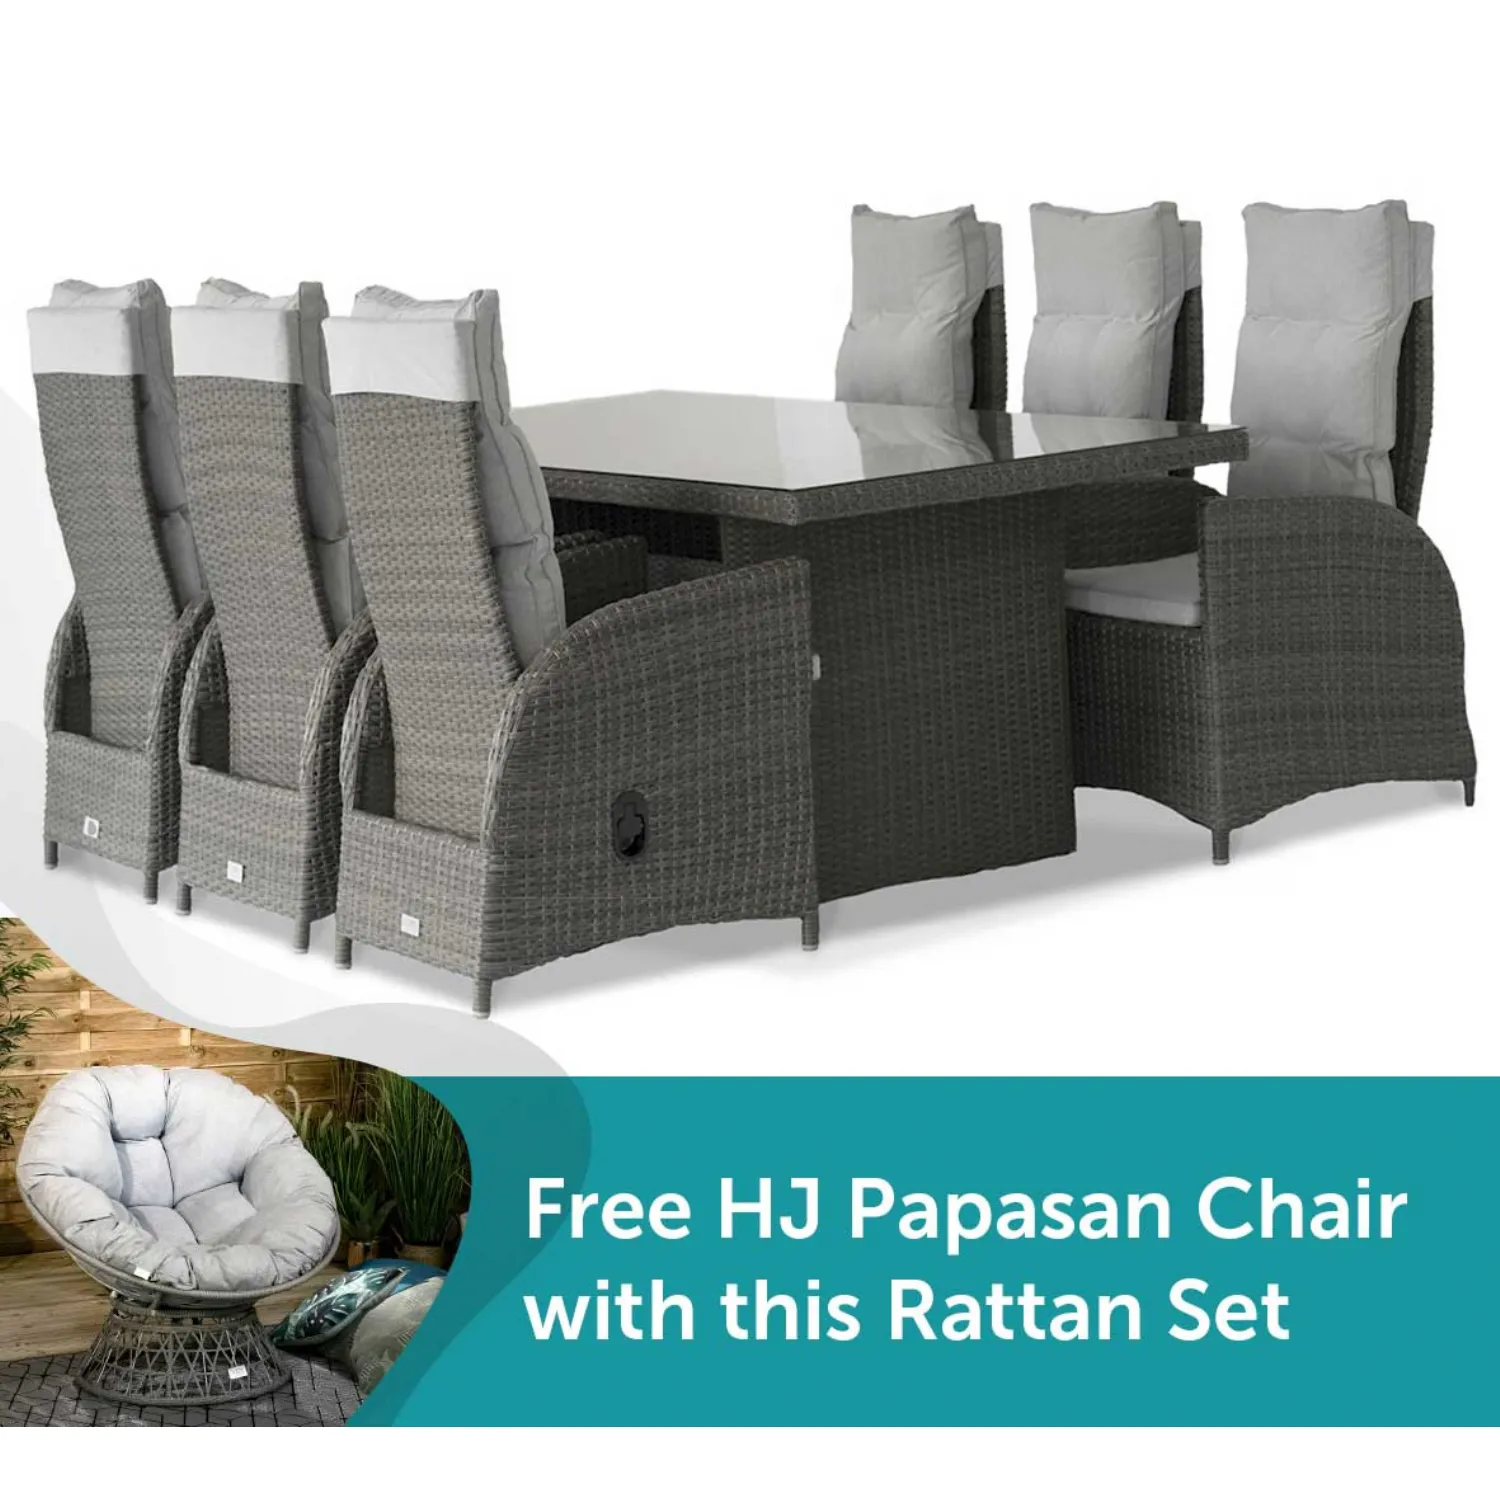 Grey Rattan 2M Dining Table, 6 Recliner Chairs + FREE Swivel Chair